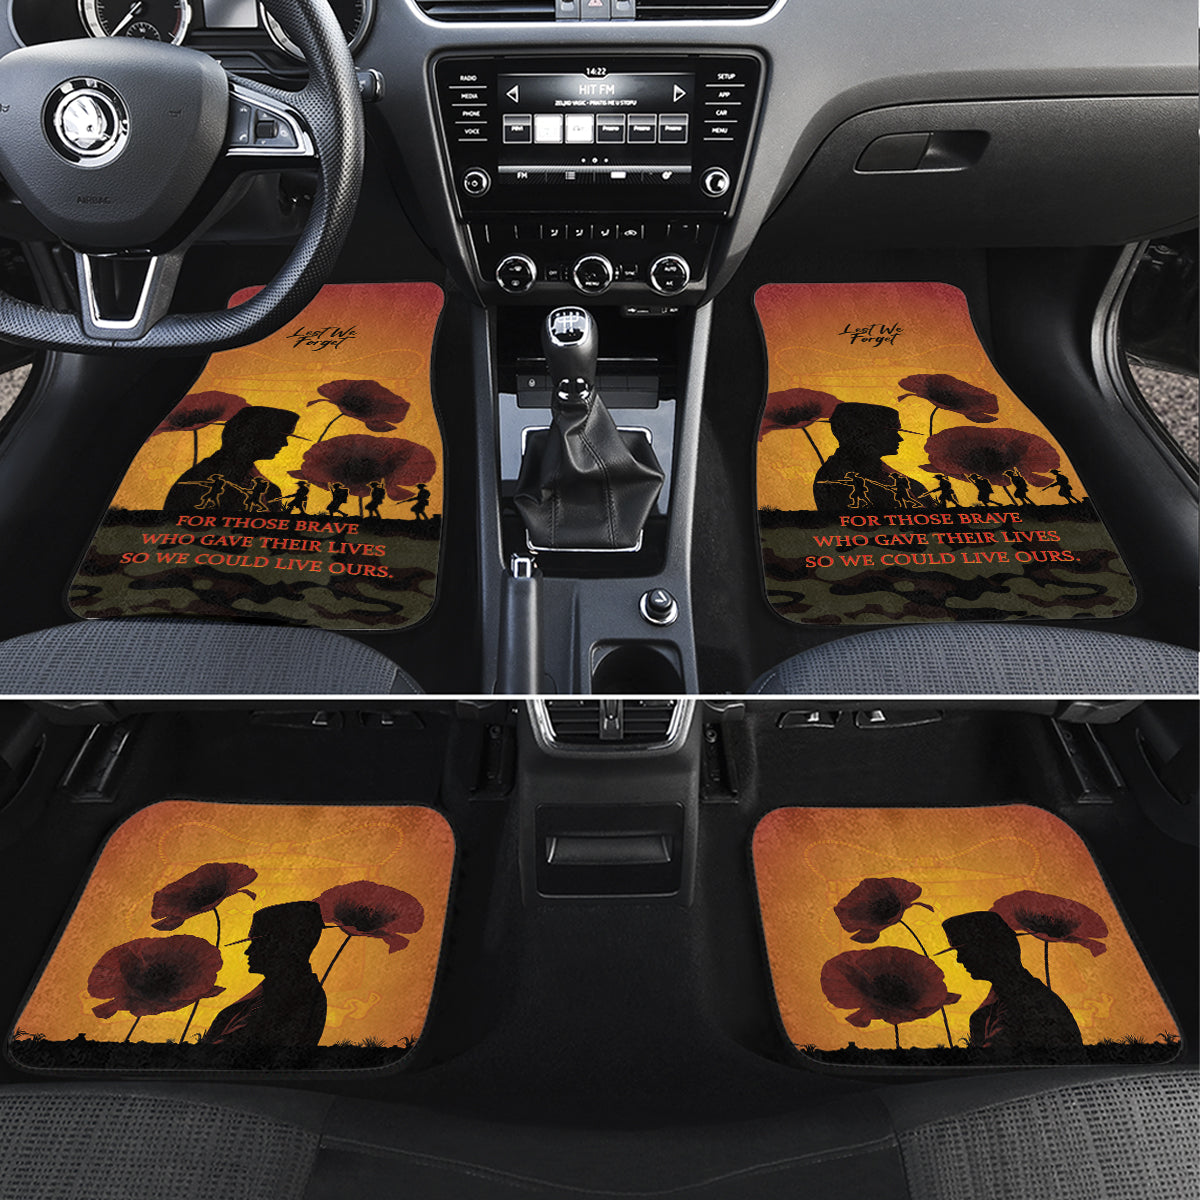 Tokelau ANZAC Day Car Mats Camouflage With Poppies Lest We Forget LT14 Set 4pcs Yellow - Polynesian Pride